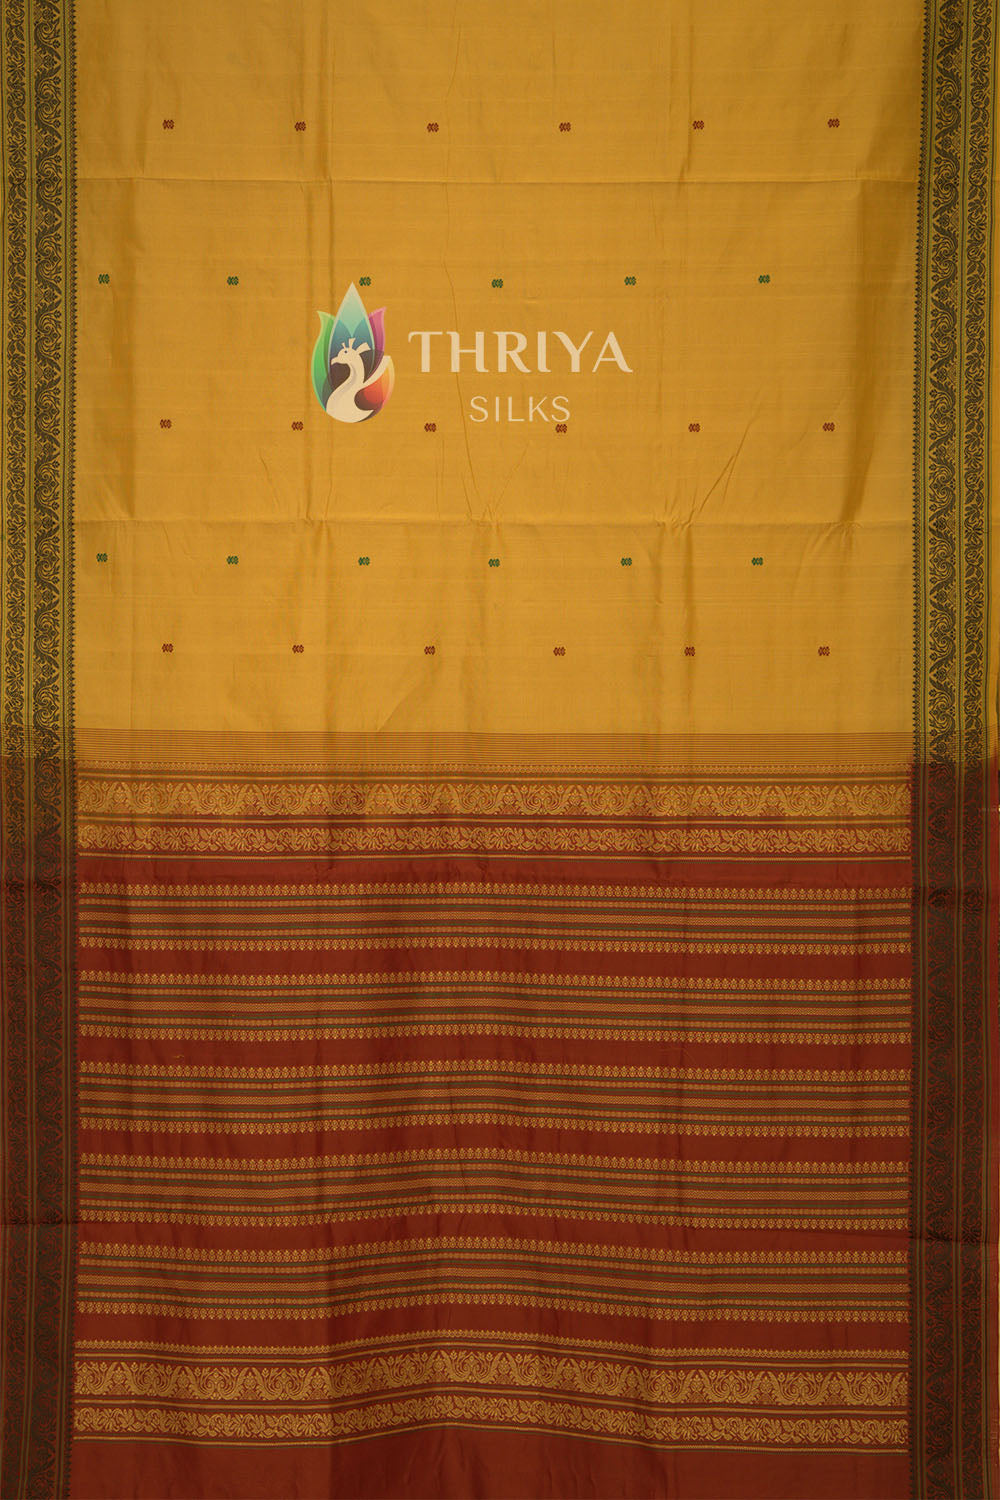 Silk Cotton Saree in Sandal And Maroon - TSC030502 - View 1